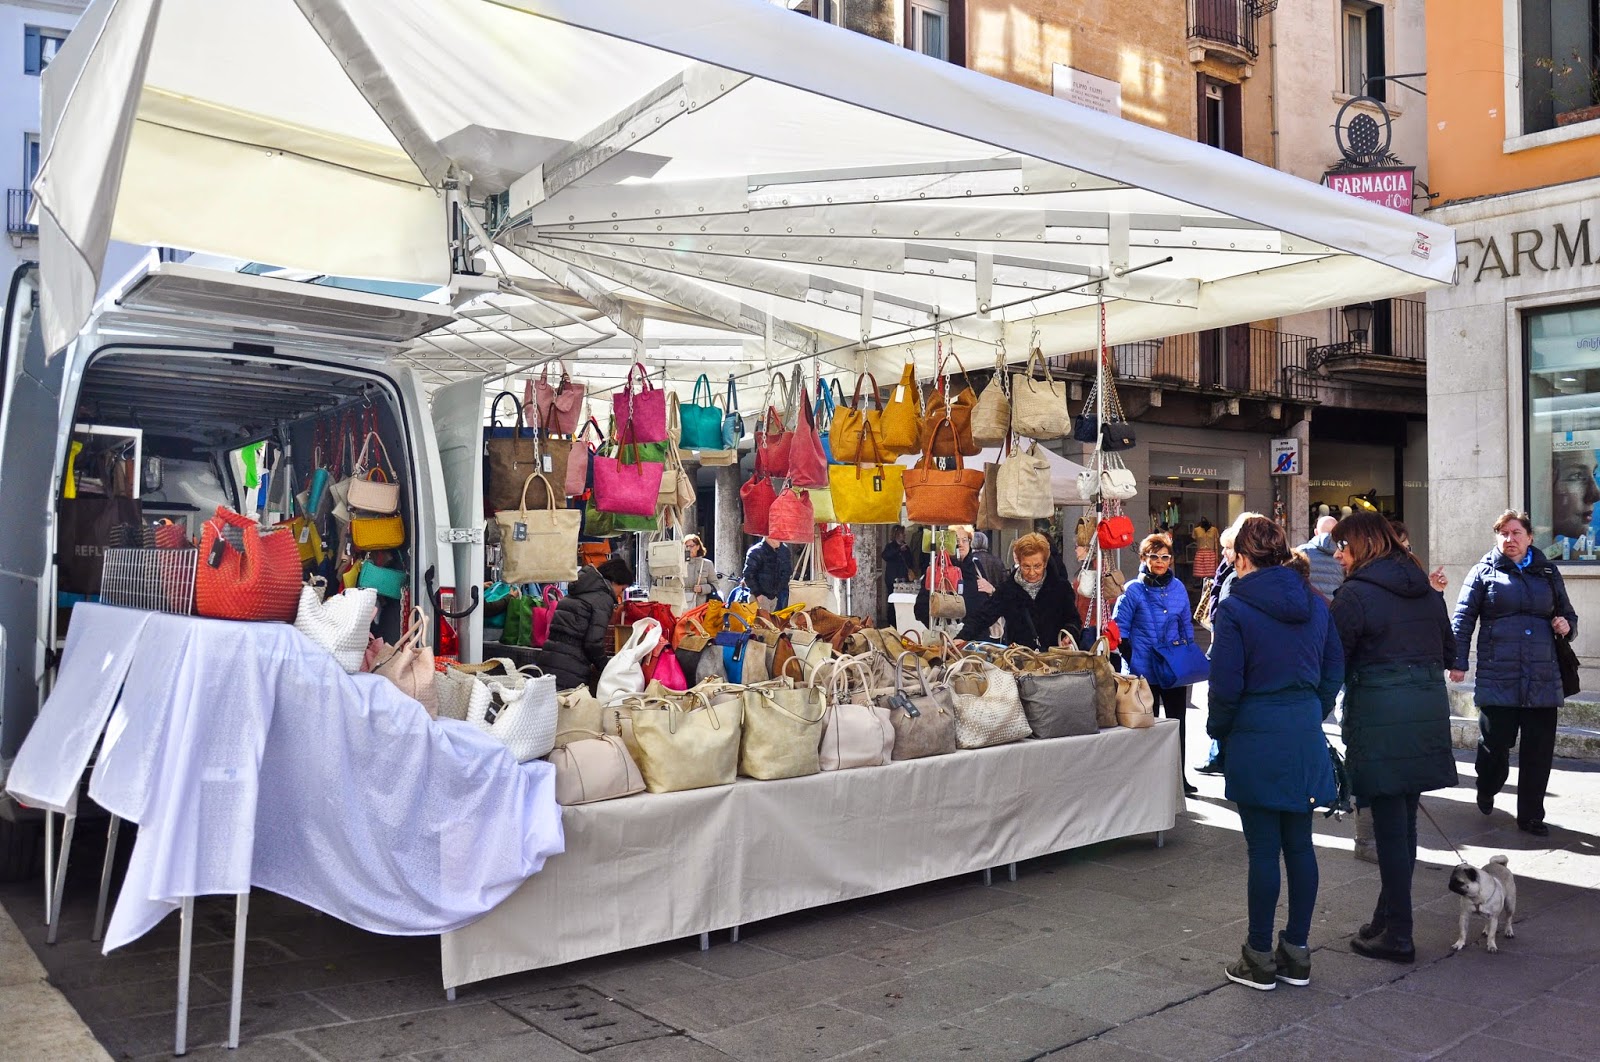 The bag stall at the Thursday market in Vicenza, Italy